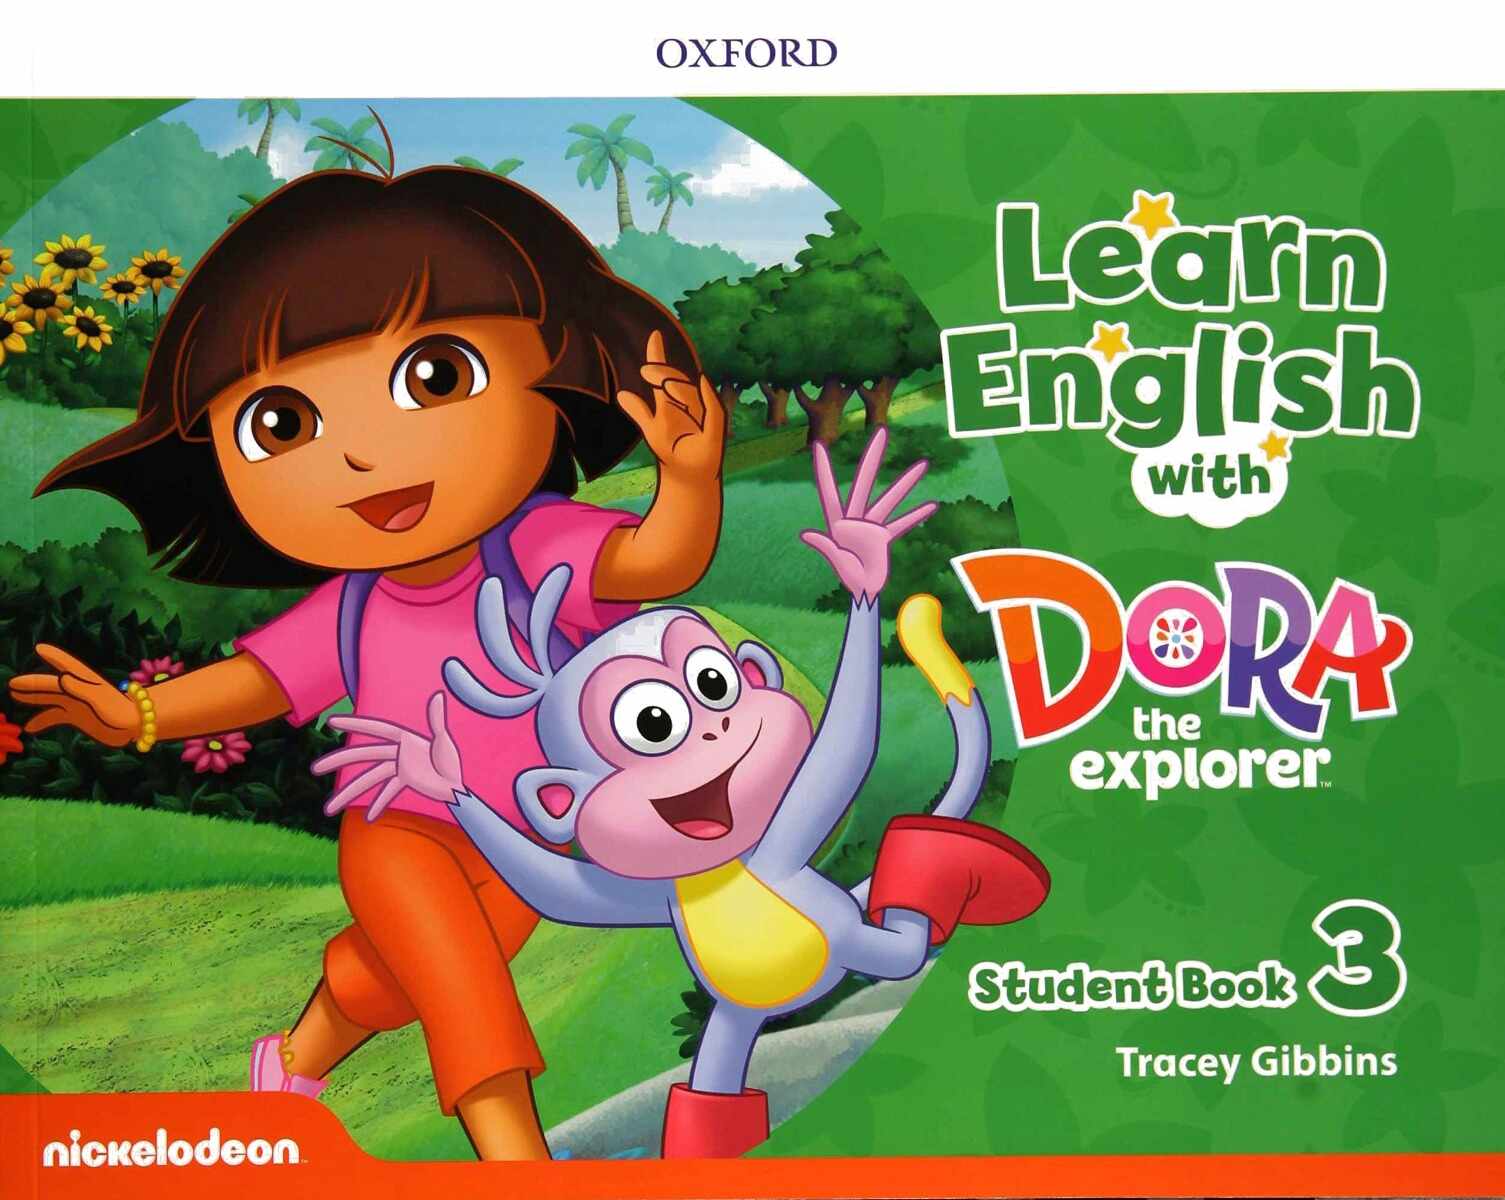 Learn English with Dora the Explorer 3: Student Book